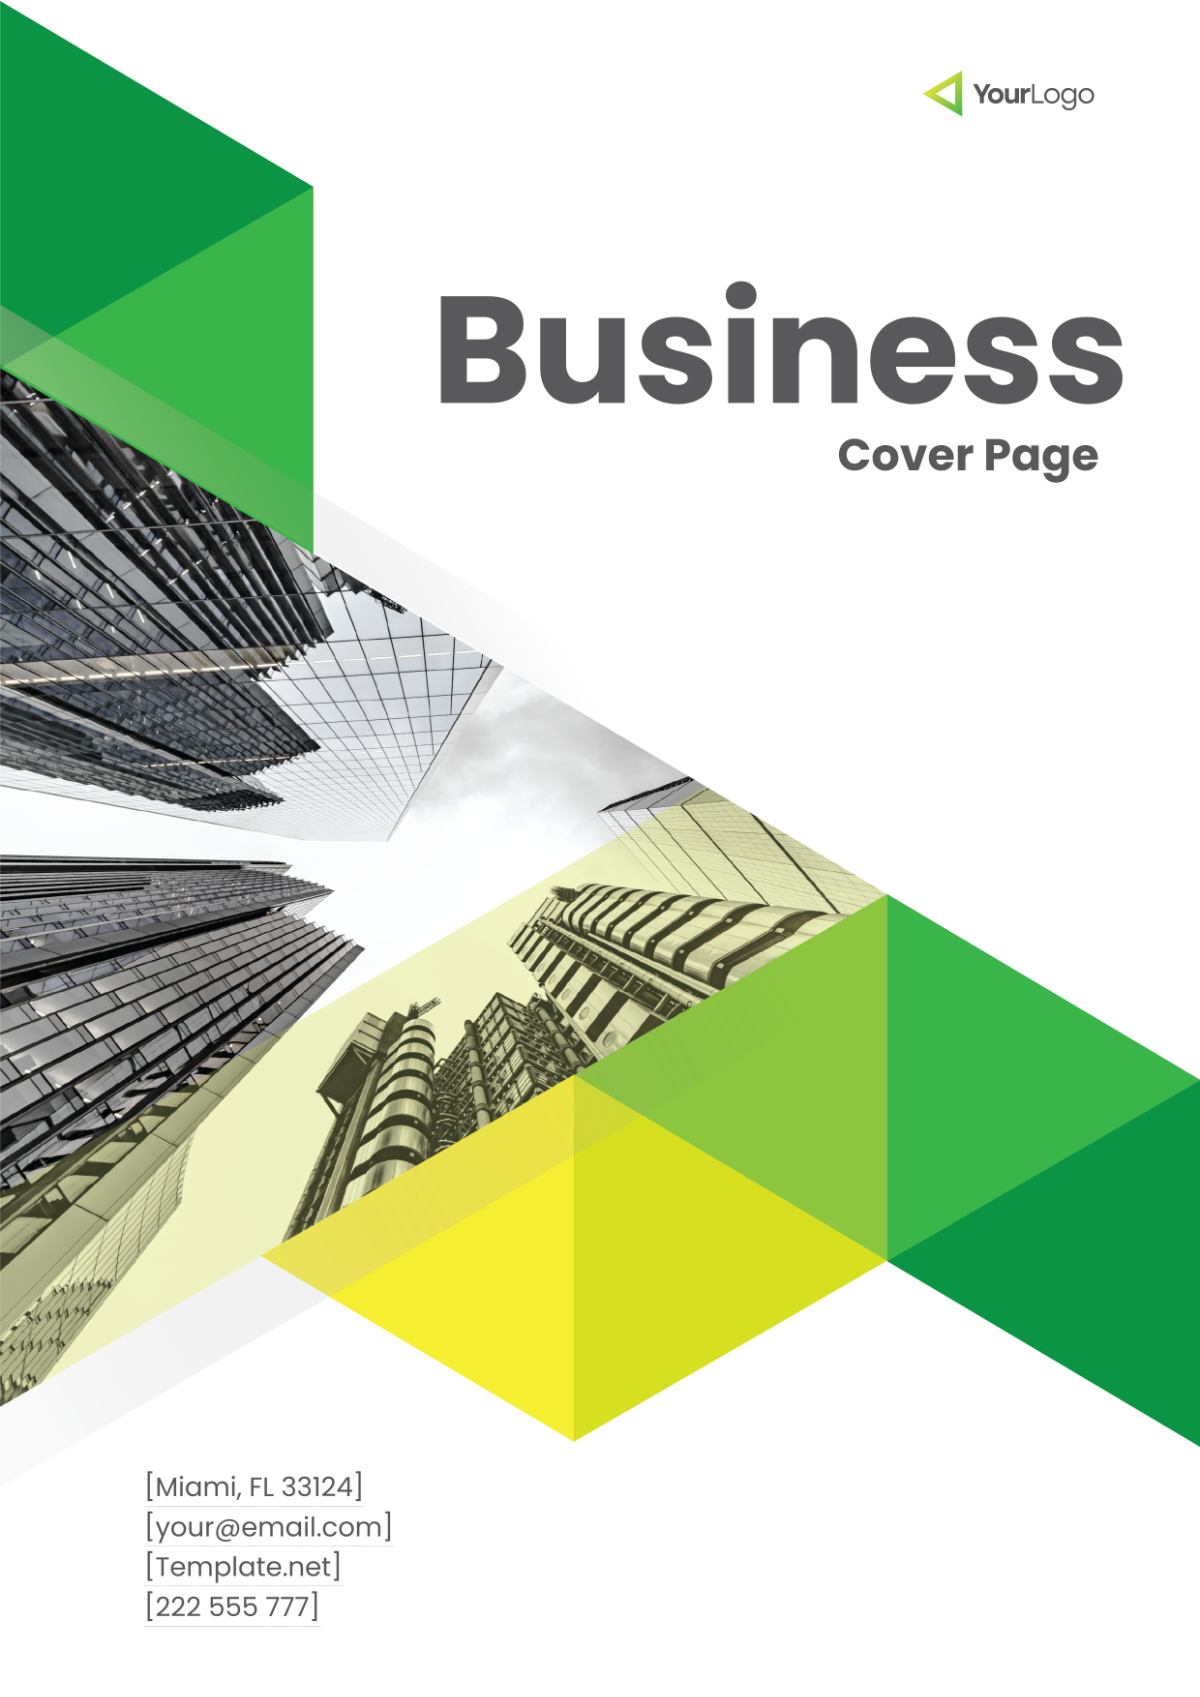 Business Cover Page Logo